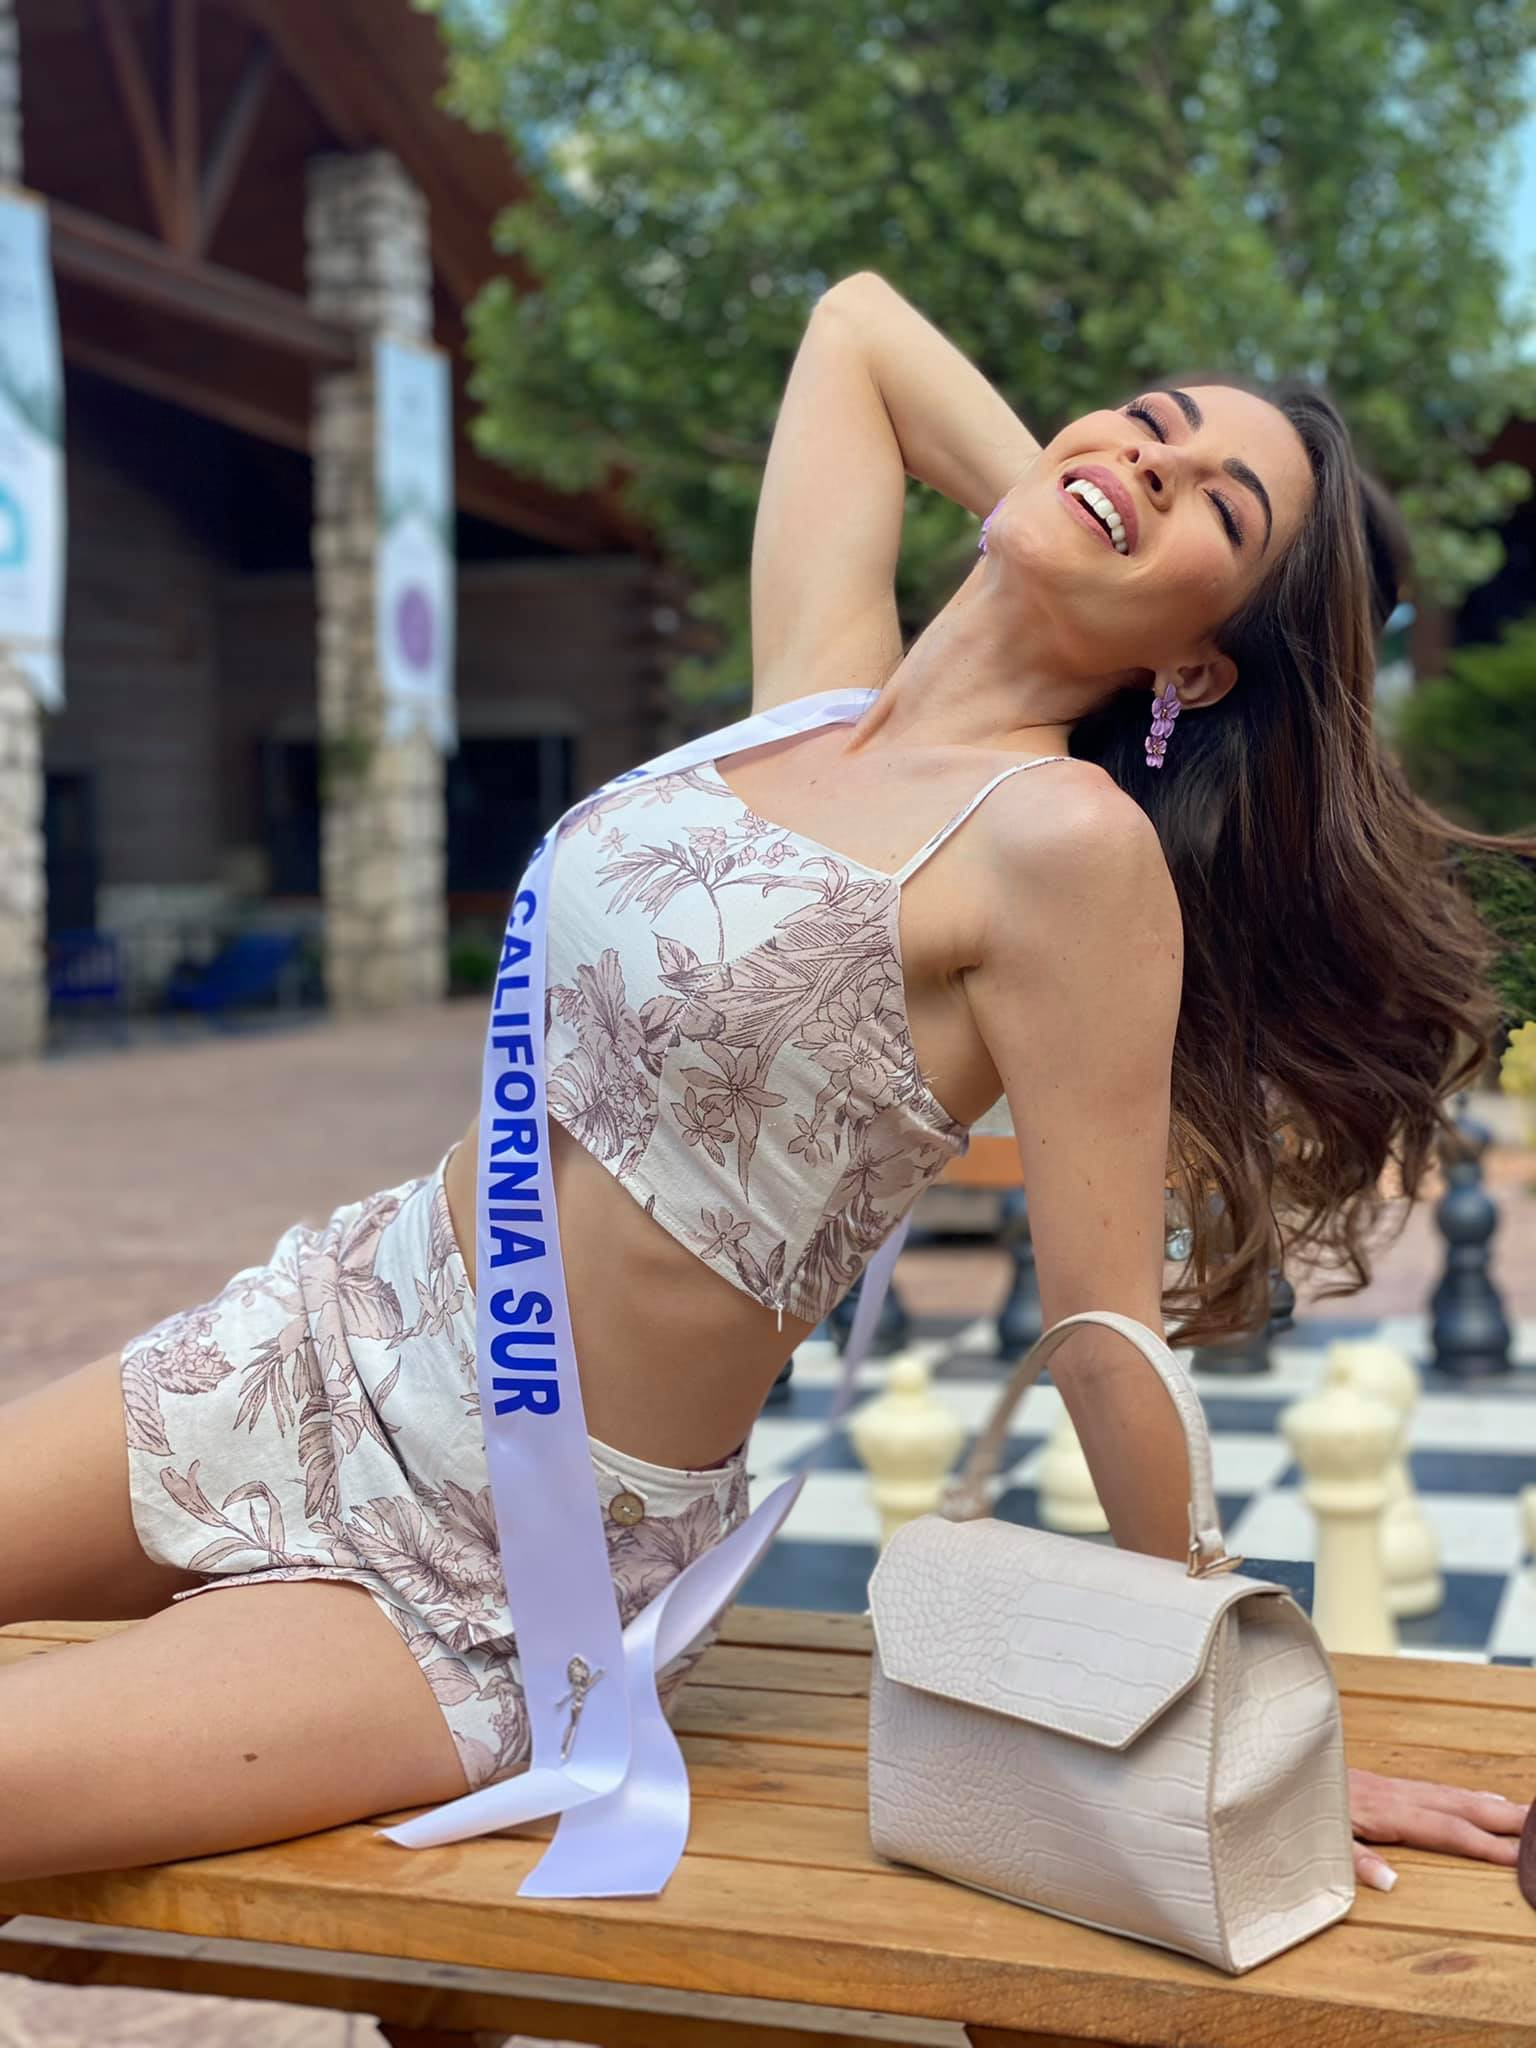 MissMexicoOrg - candidatas a miss mexico 2021, final: 1 july. - Página 37 Of7wWF